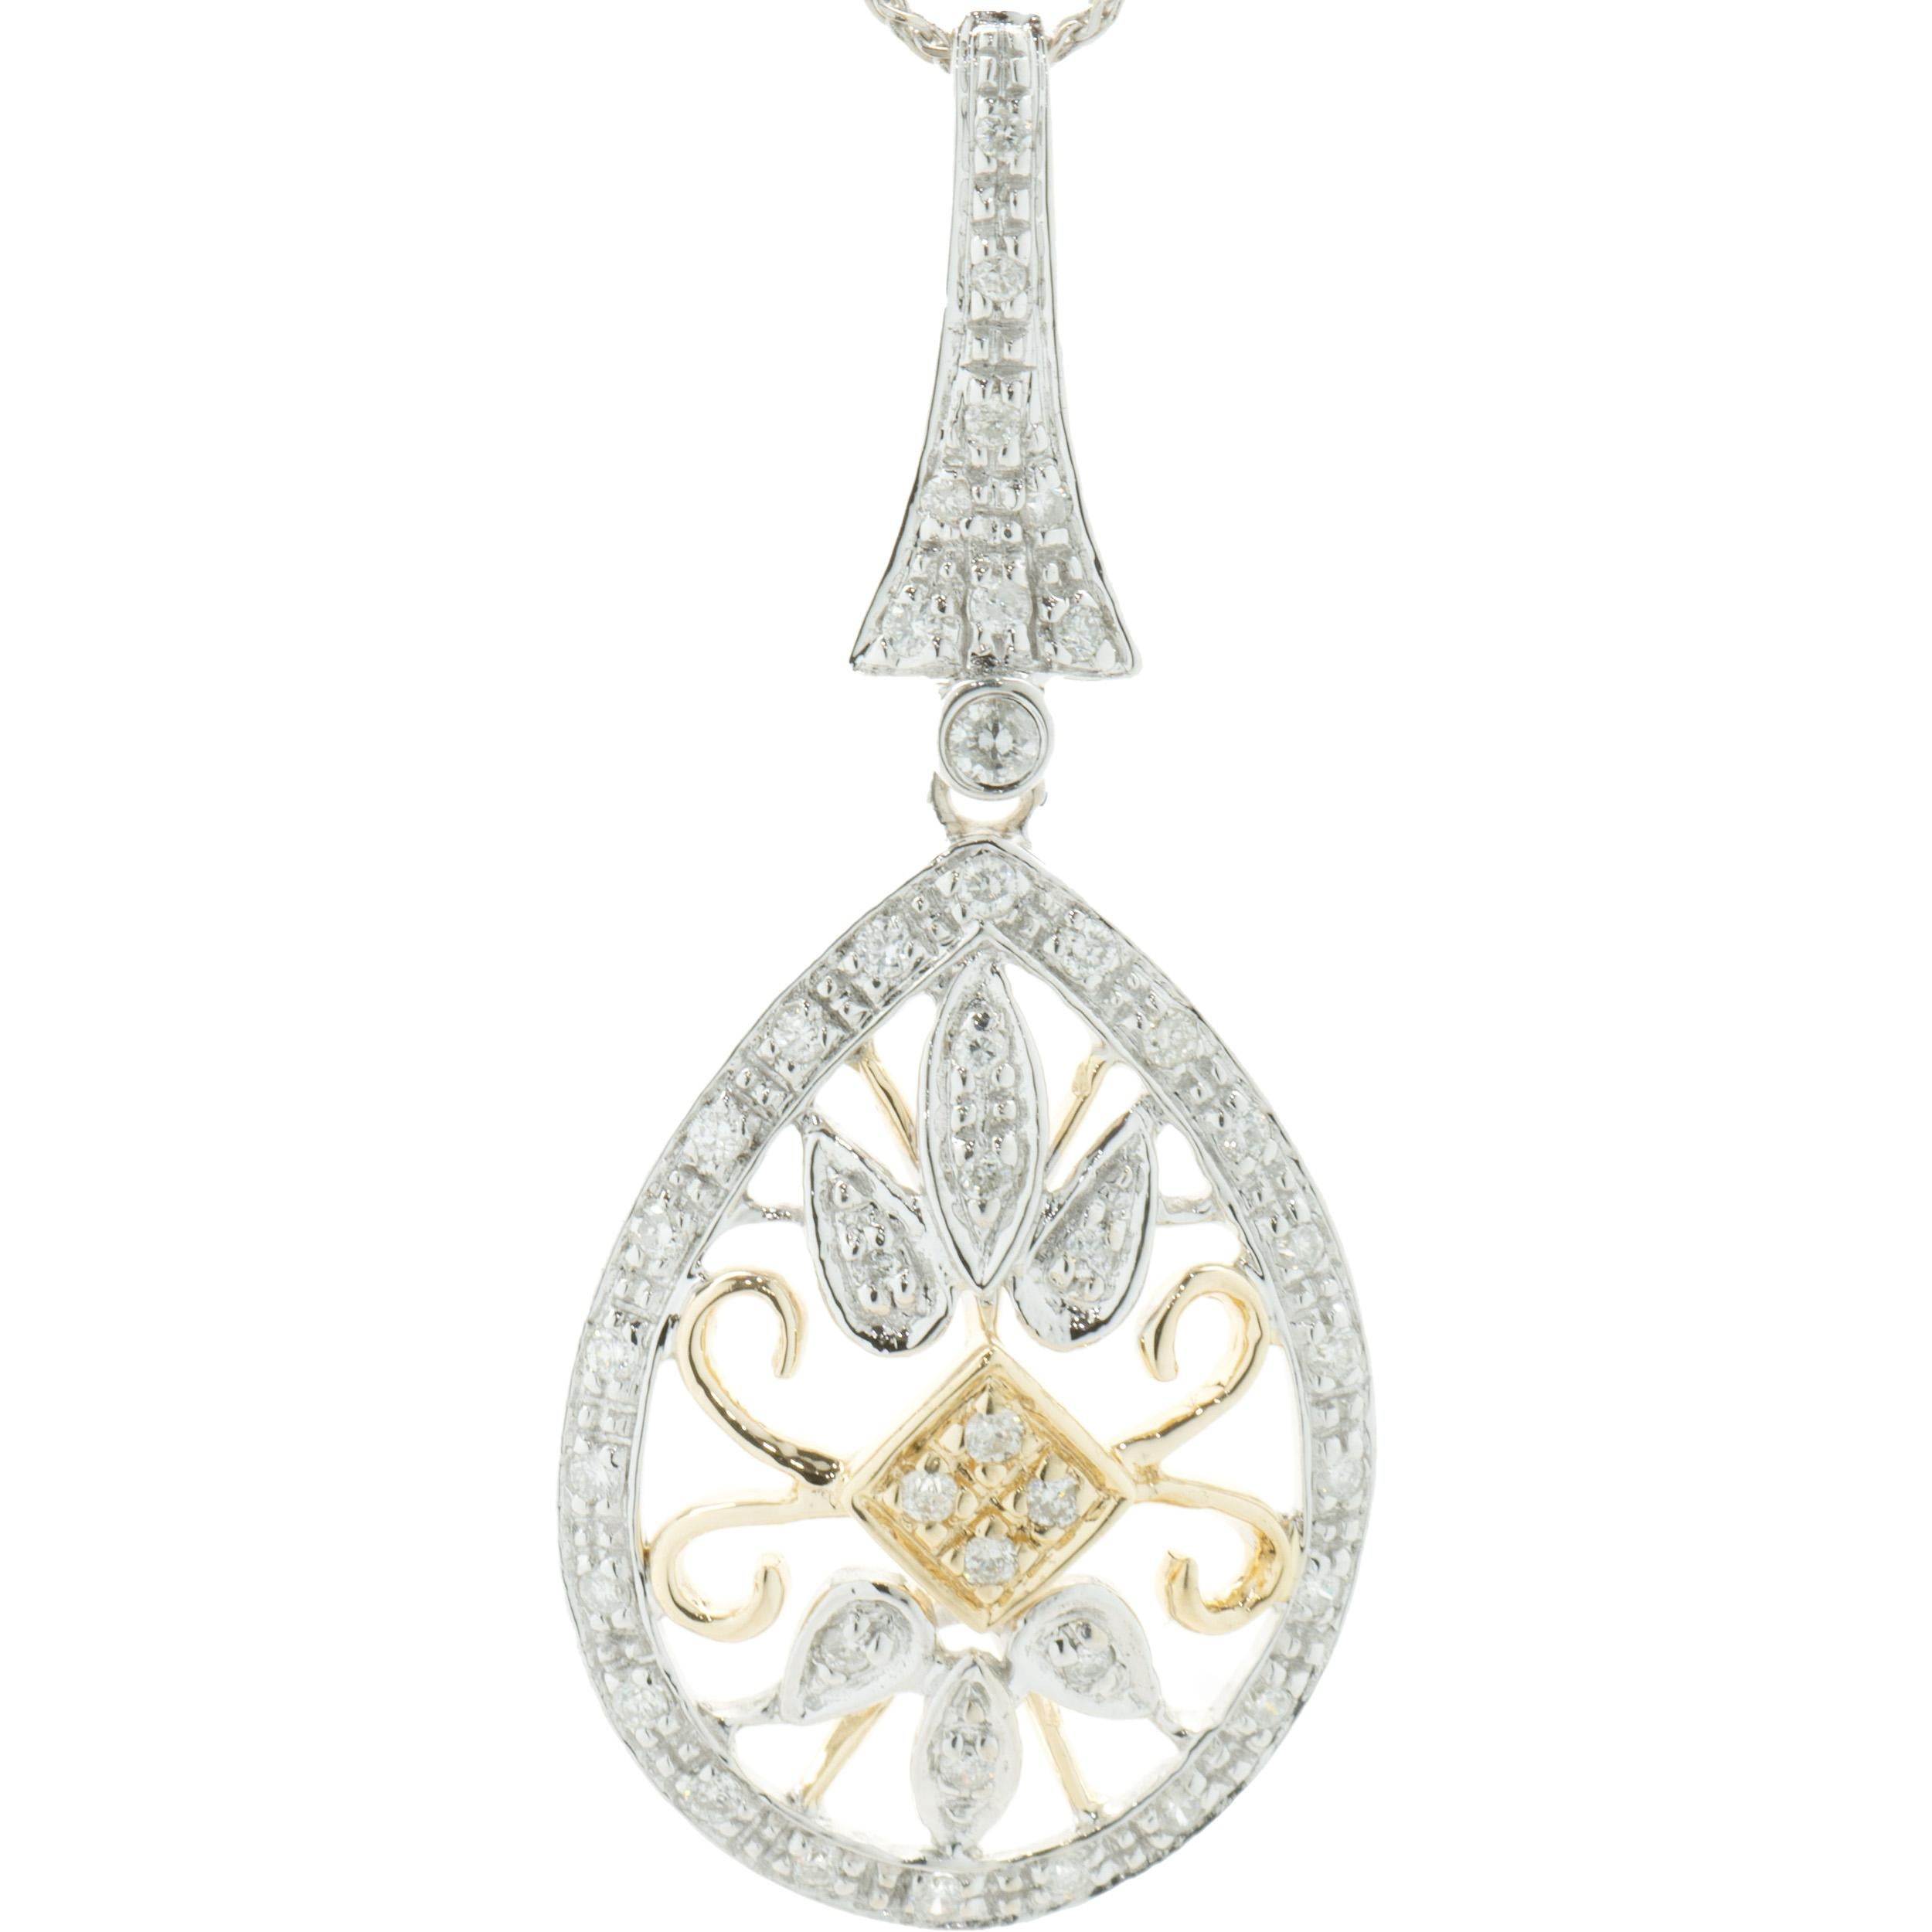 Designer: custom
Material: 14K yellow & white gold
Diamonds: 42 round brilliant cut = 0.42cttw
Color: G
Clarity: SI1
Dimensions: necklace measures 18-inches in length 
Weight: 4.10 grams